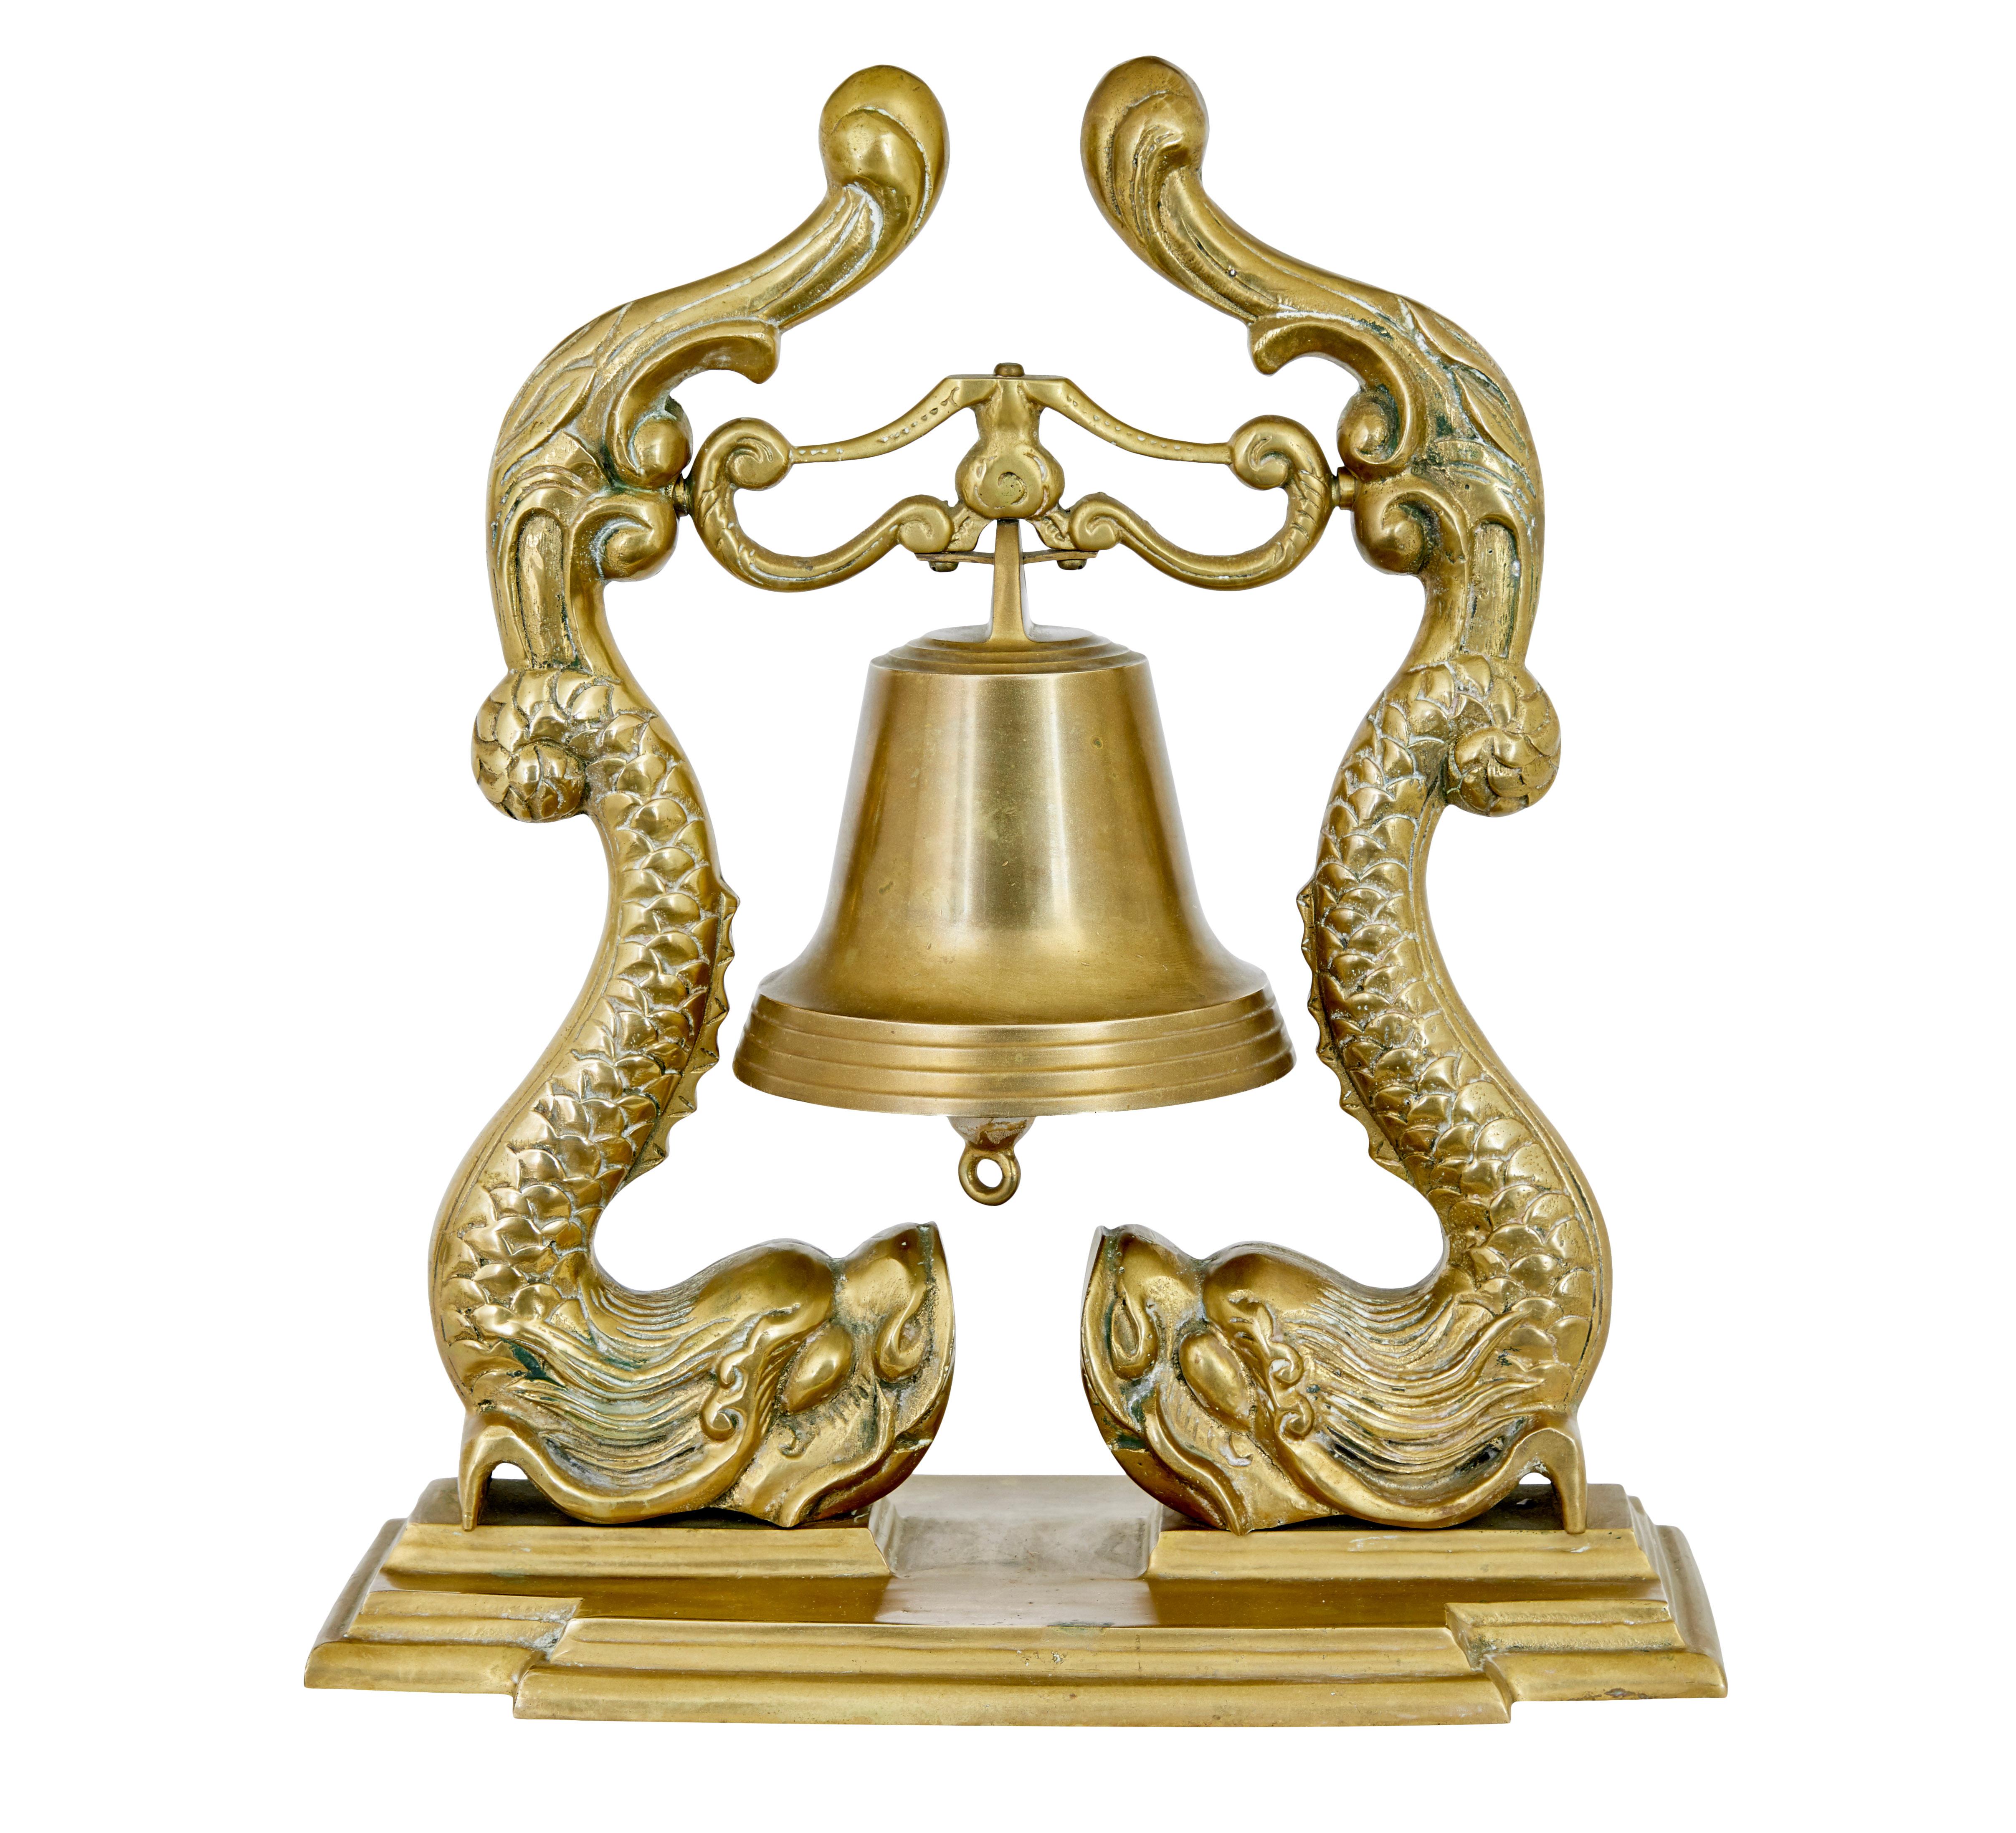 19th century Victorian brass decorative dinner bell circa 1890.

Features 2 stylised fish which form the suspension arms to support the bell. Standing on plinth base. Would have had a rope from the bottom of the bell, now lacking, but can be easily